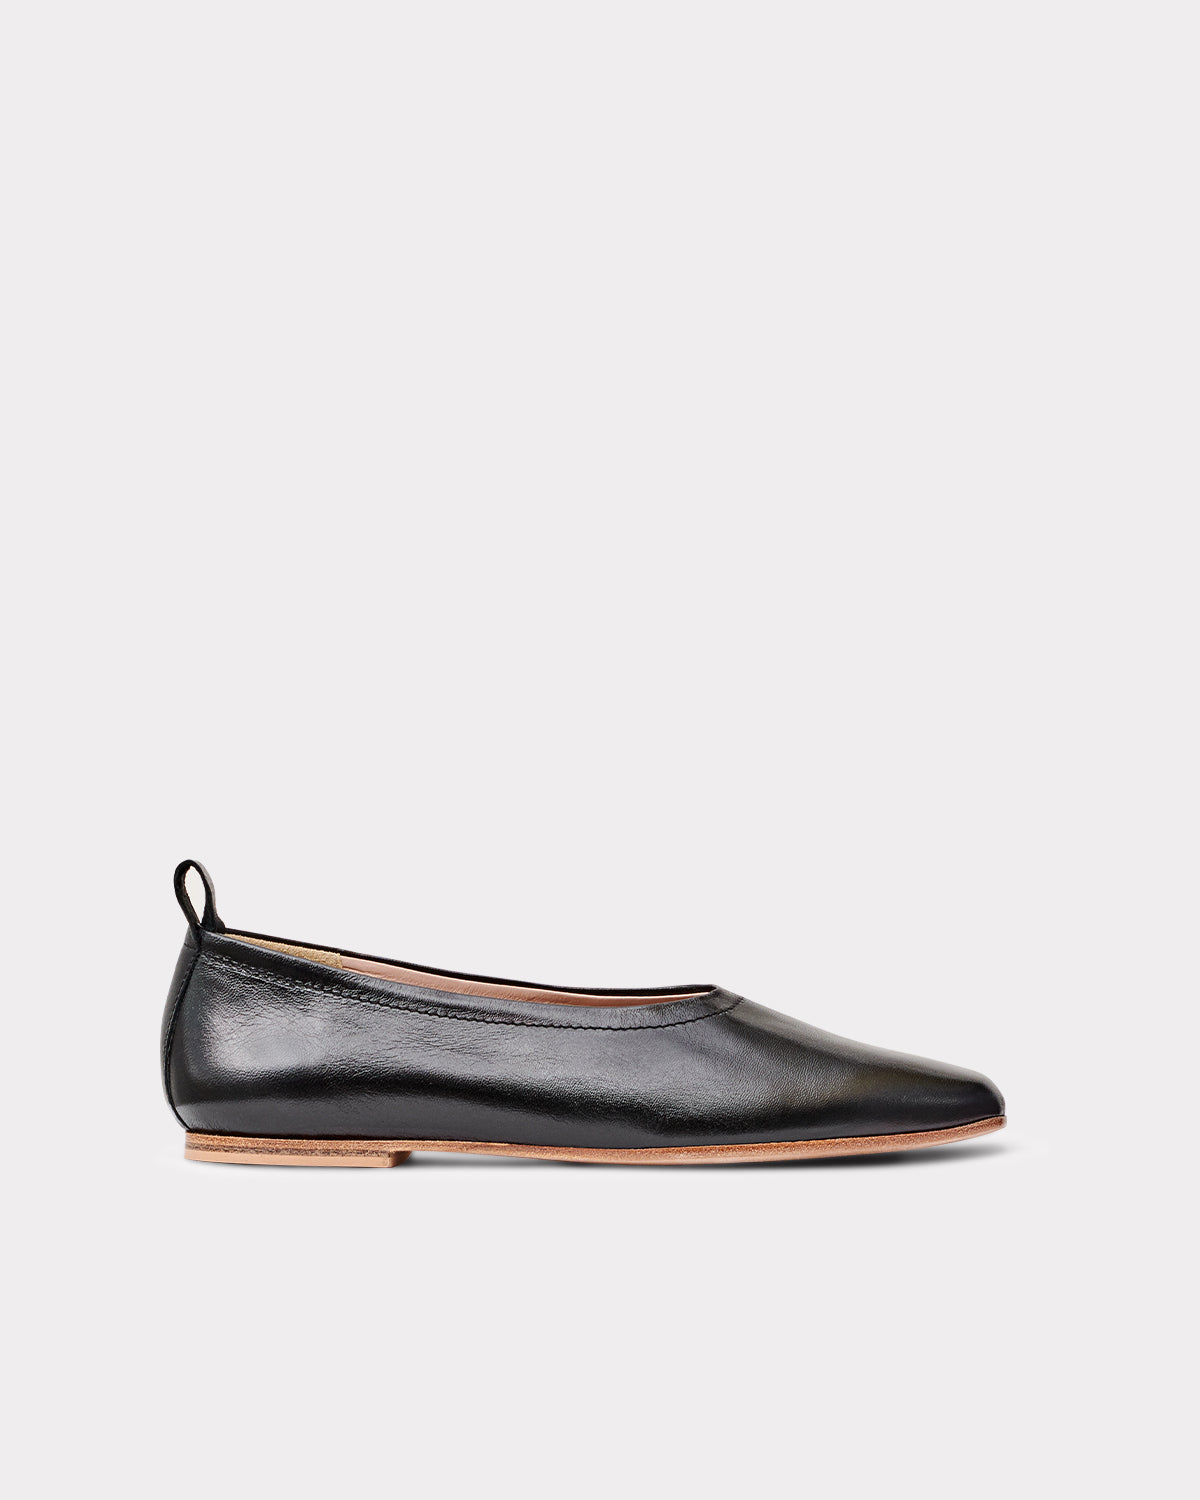 ethically sourced black leather flats 